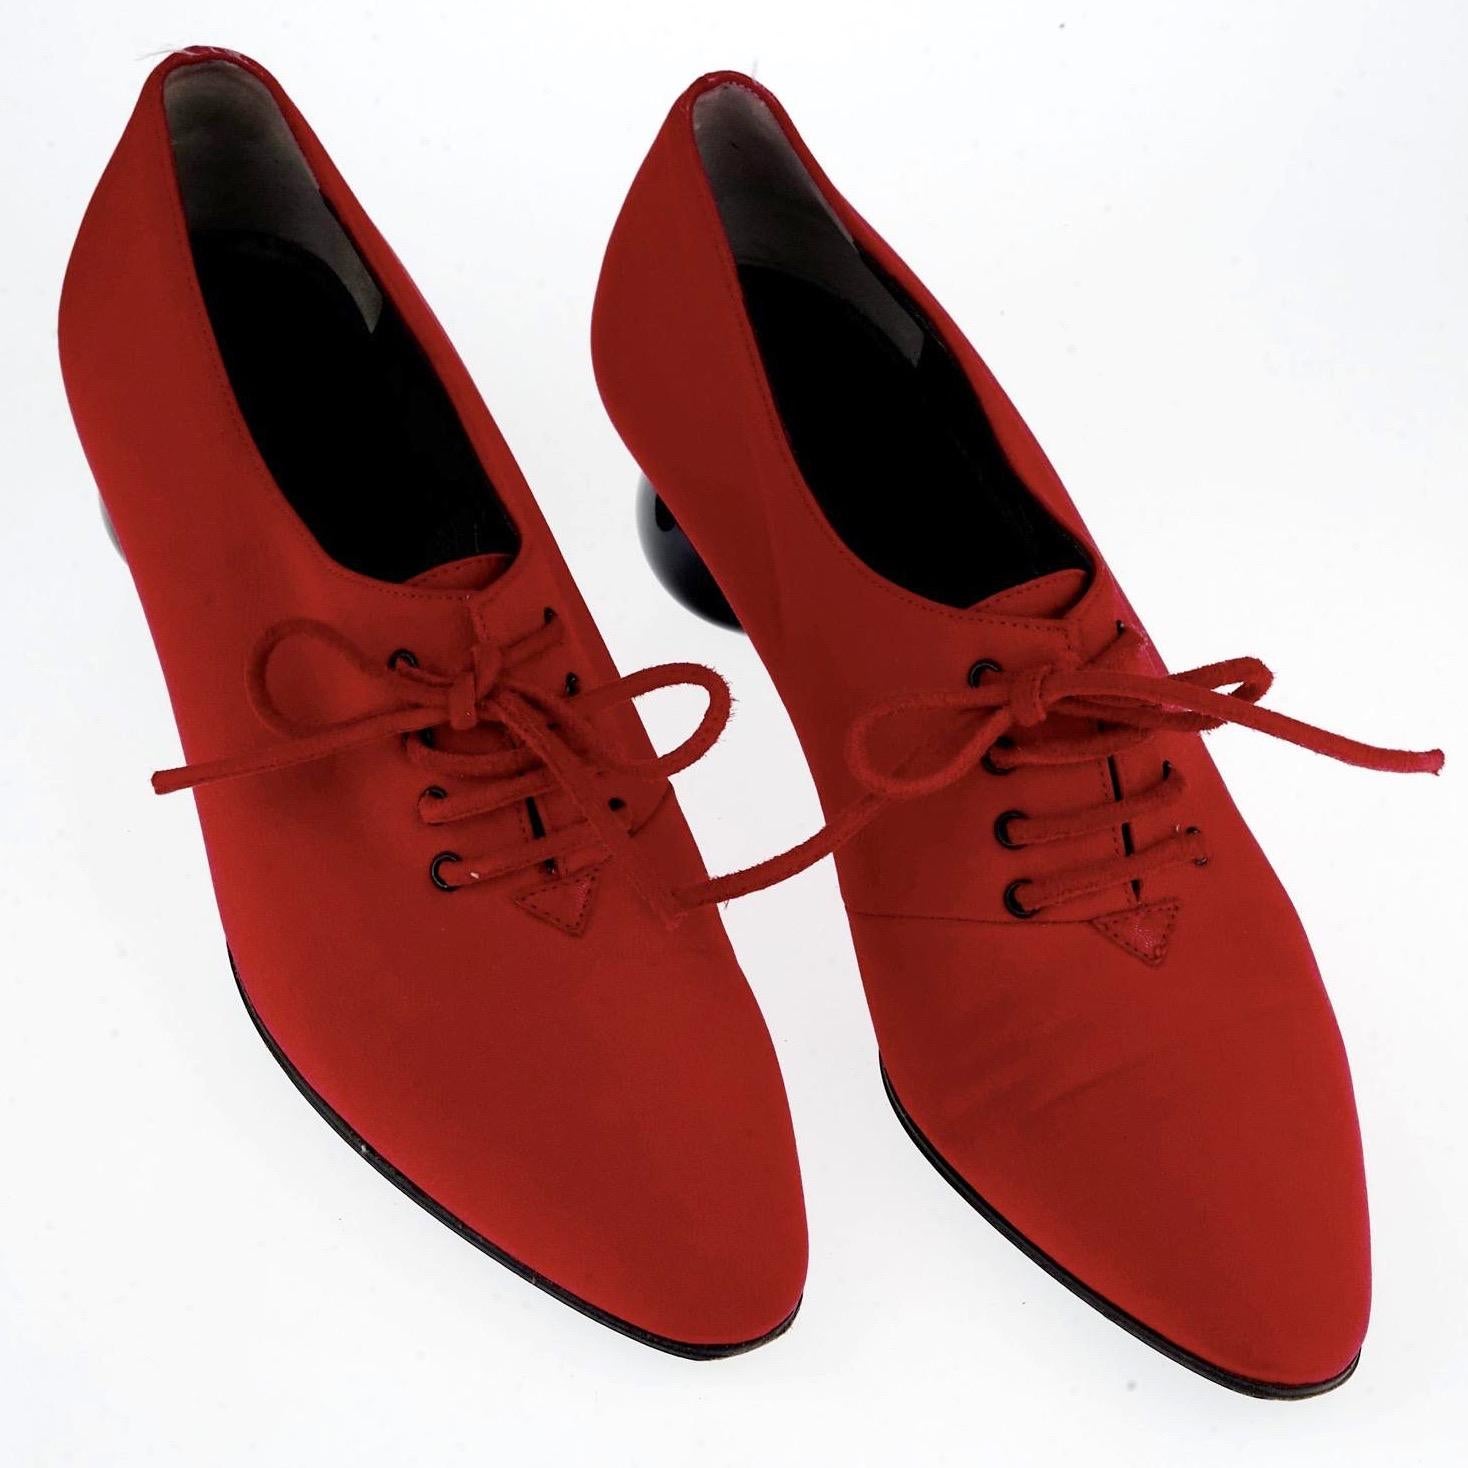 Vintage YVES SAINT LAURENT Ysl Red Ball Heel Pumps Lace Up Shoes In Good Condition For Sale In Kingersheim, Alsace